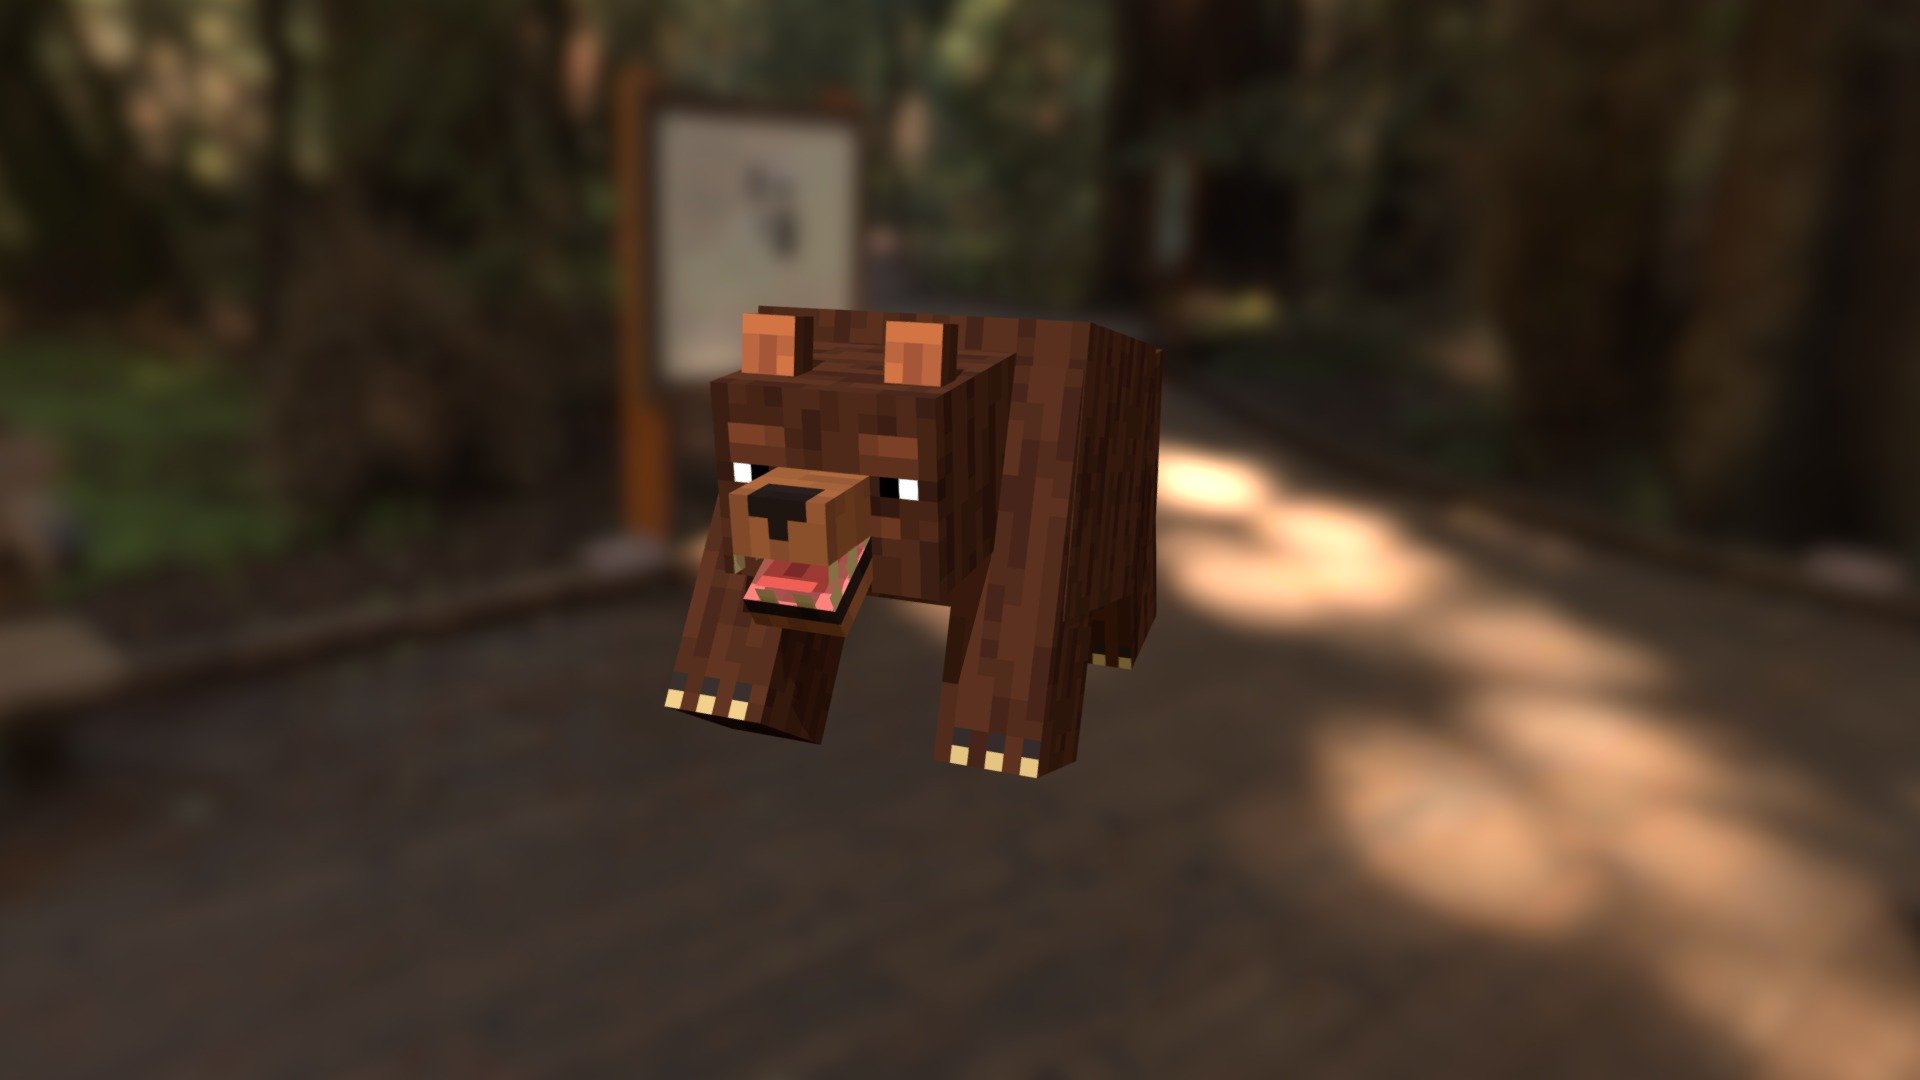 Bear Animation Set in Minecraft Artstyle

Animated by me, static model provided by Gamemode1. 

2022 Sebastian Santamaura - Minecraft Bear Animations - 3D model by sebastiansantamaura 3d model